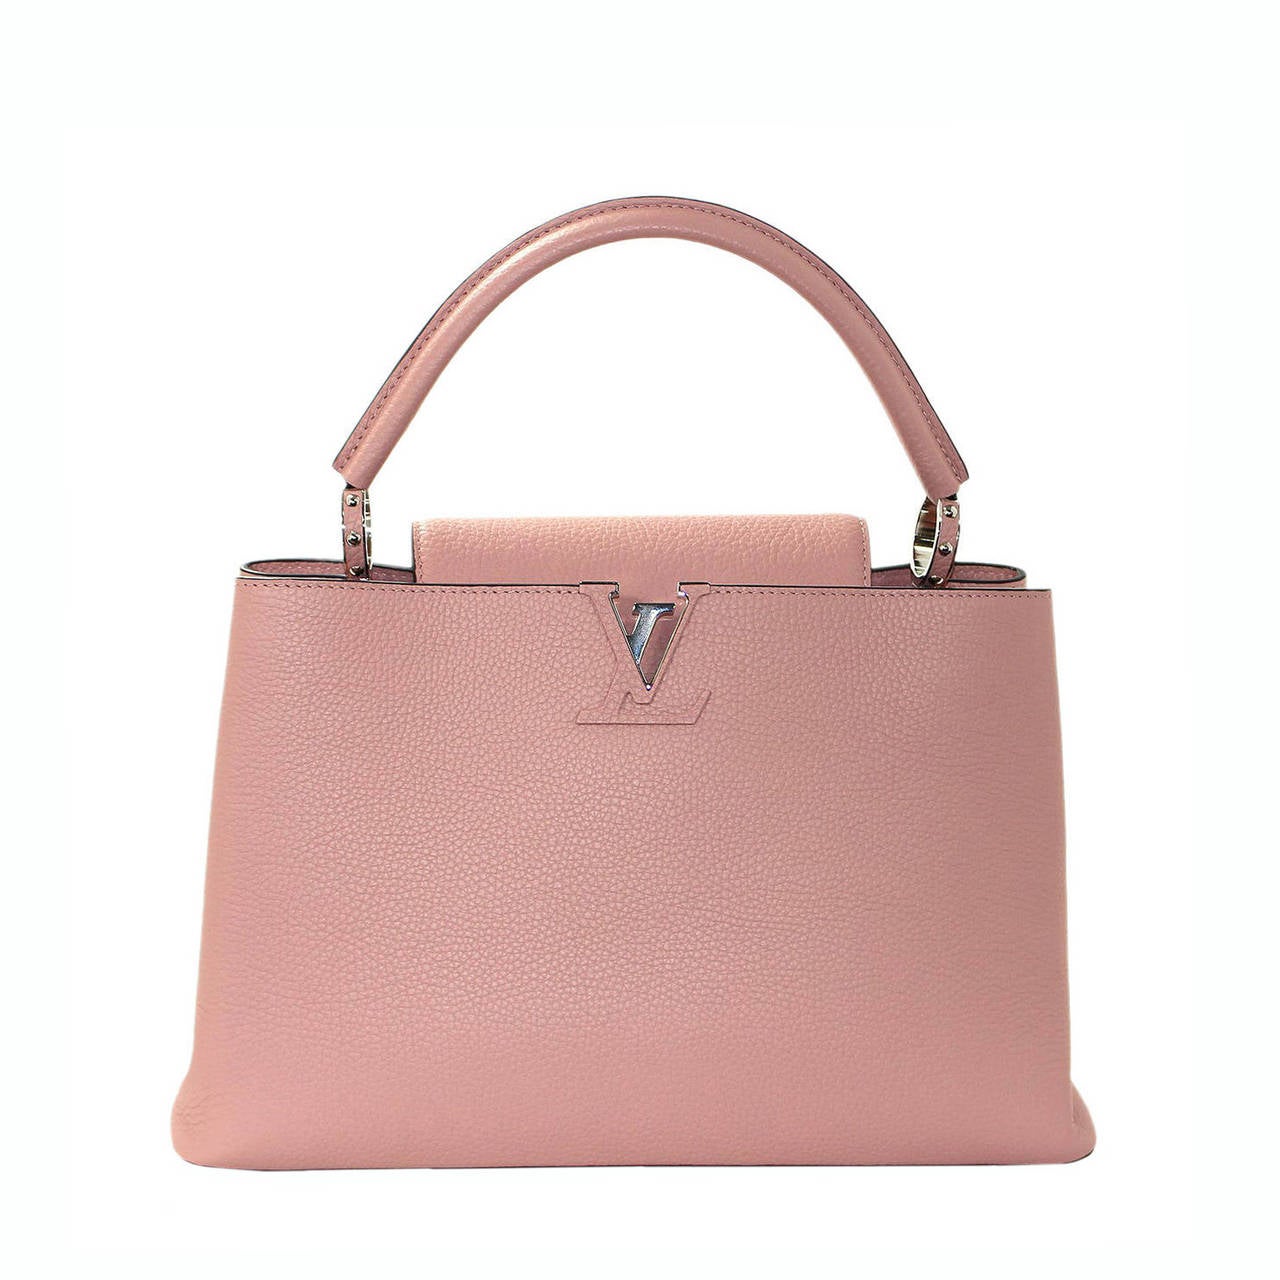 Louis Vuitton Magnolia Leather Capucines MM Bag- PINK color at 1stdibs